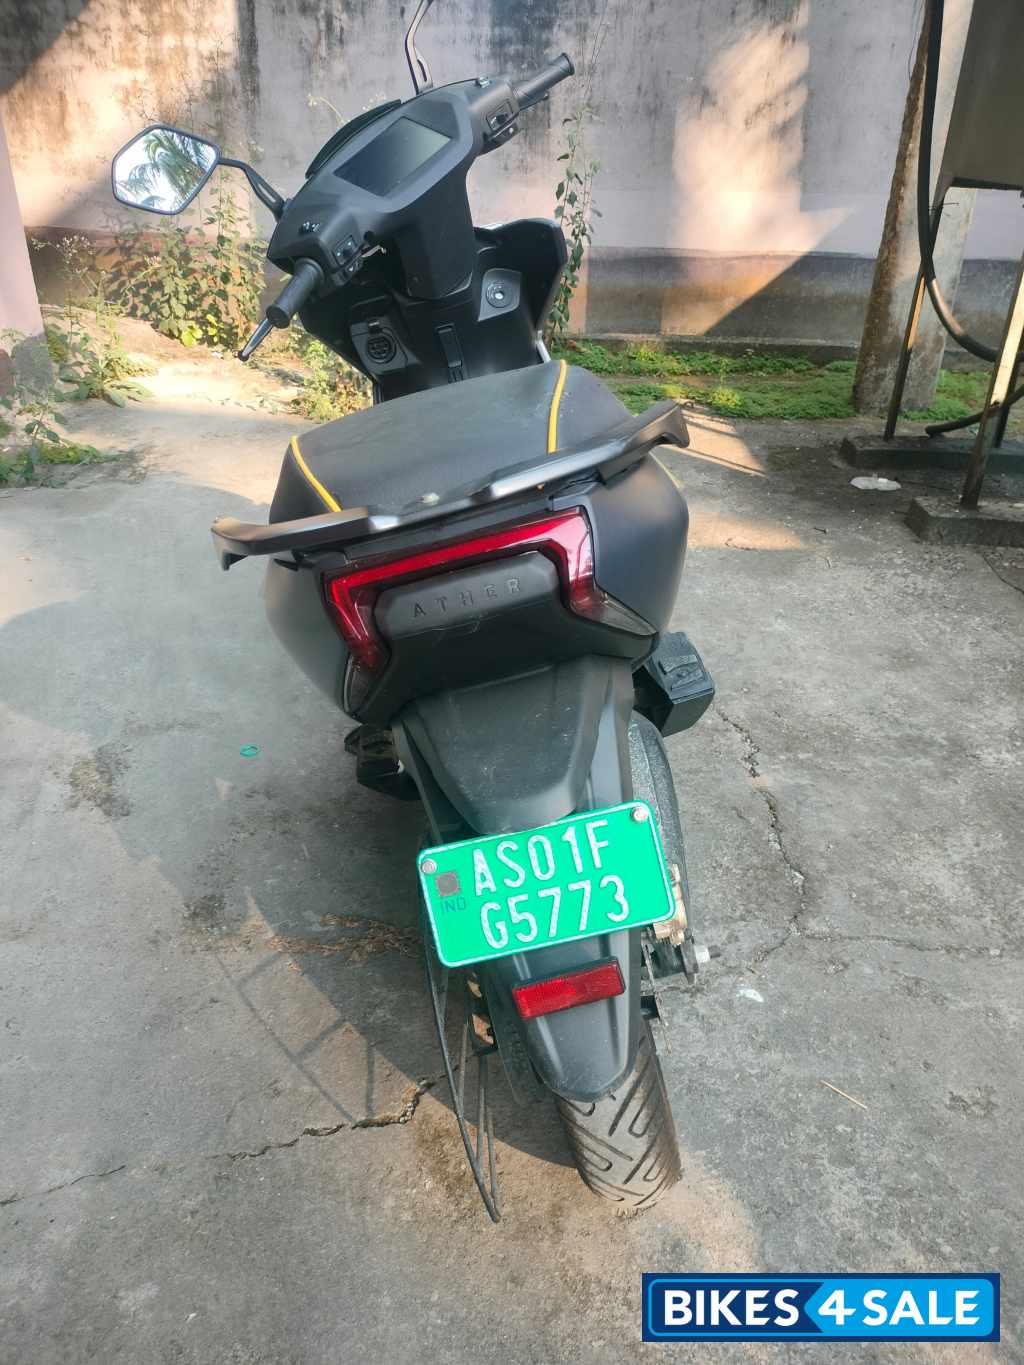 Ather 450 Plus Gen 3